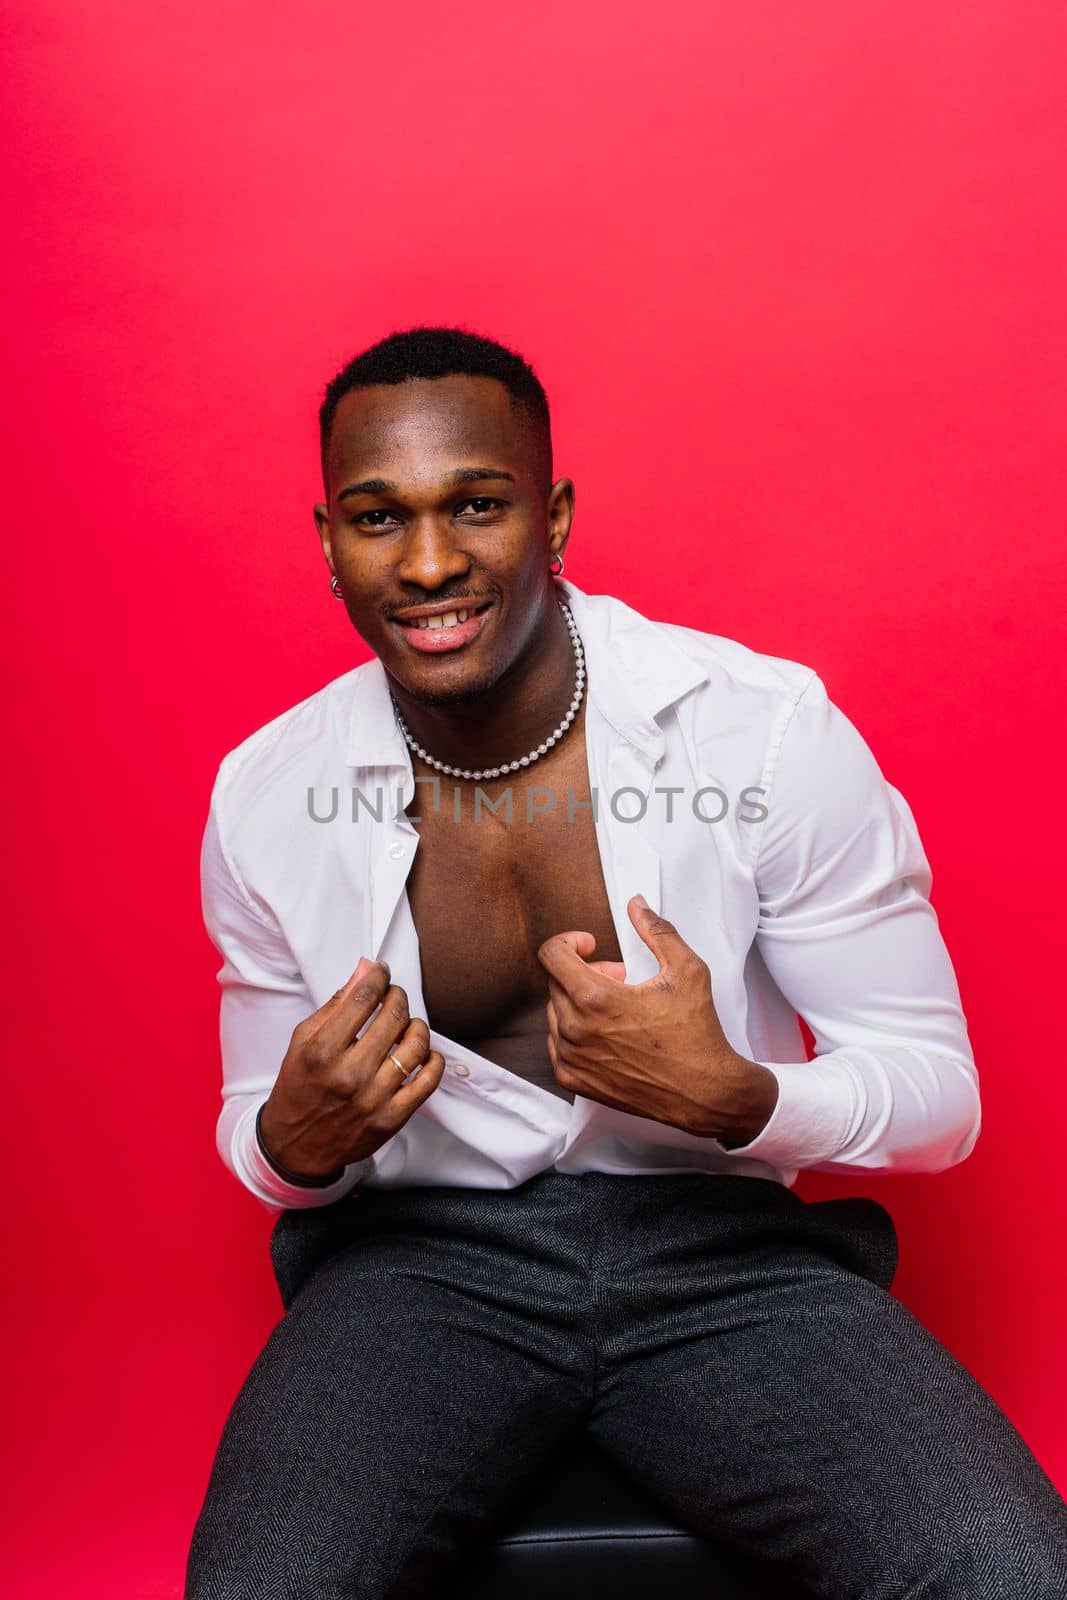 Smiling young african american man guy isolated on yellow background studio. People sincere emotion